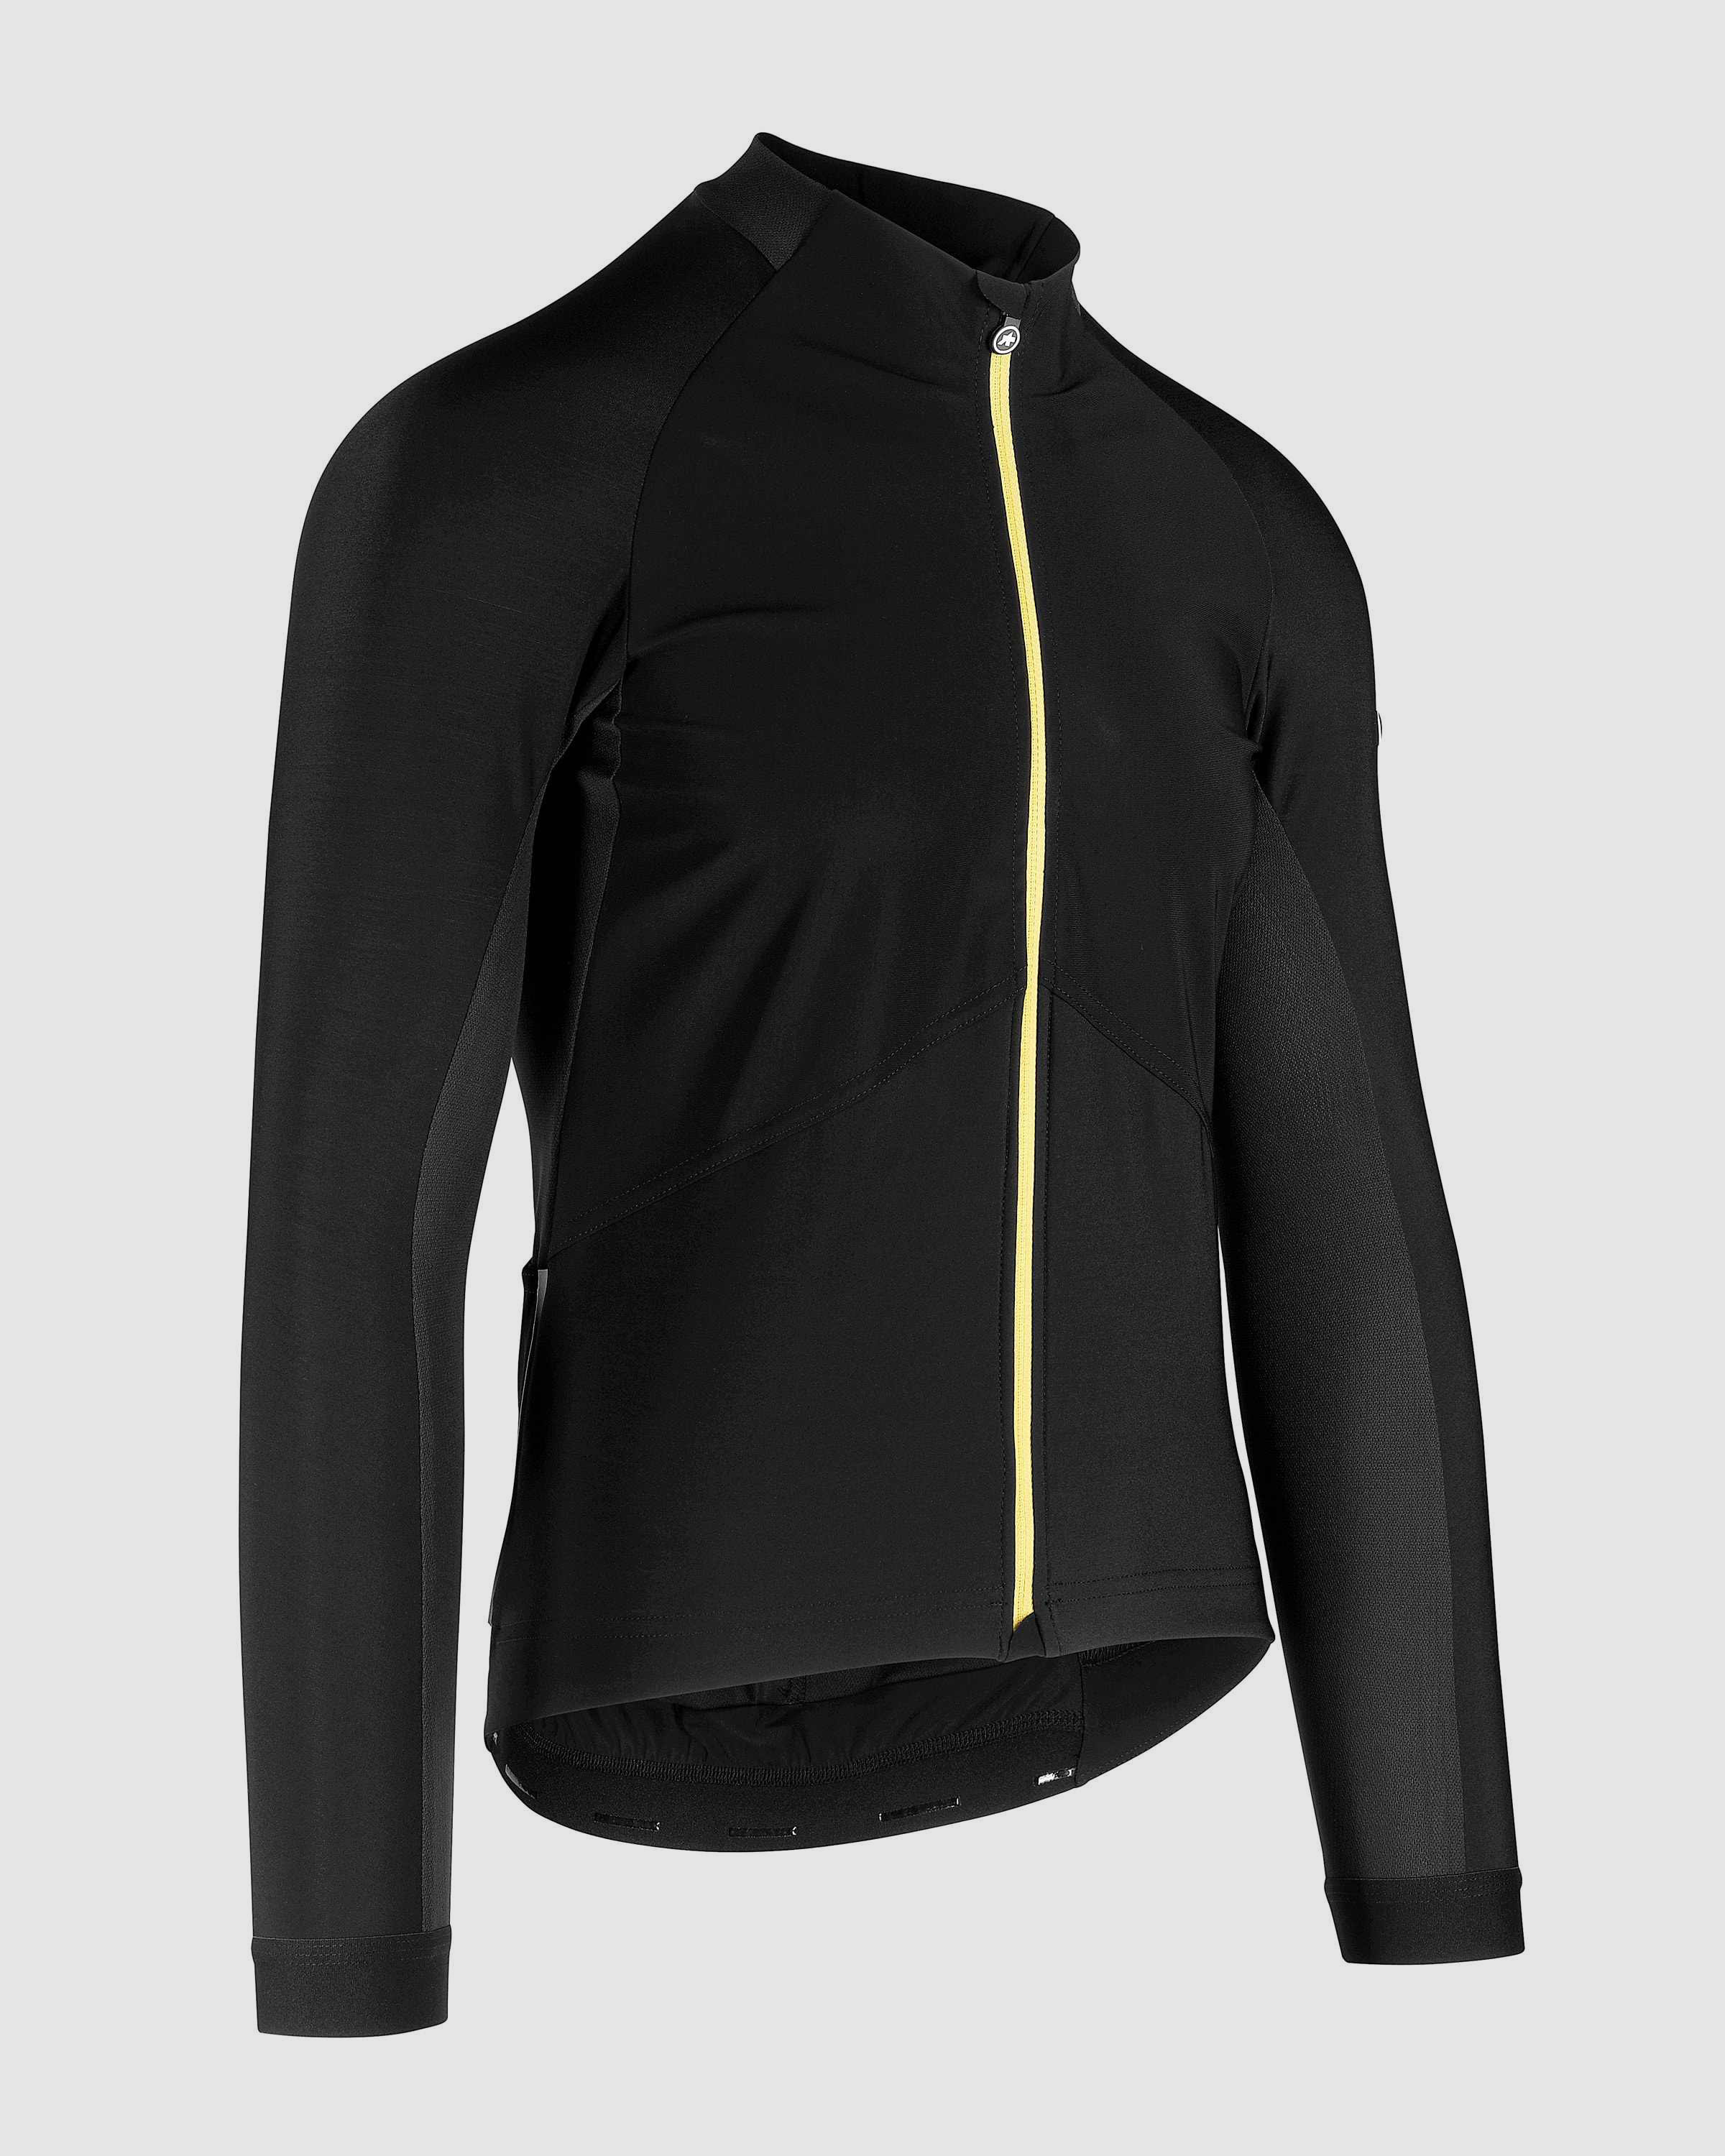 MILLE GT Spring Fall Jacket - ASSOS Of Switzerland - Official Outlet